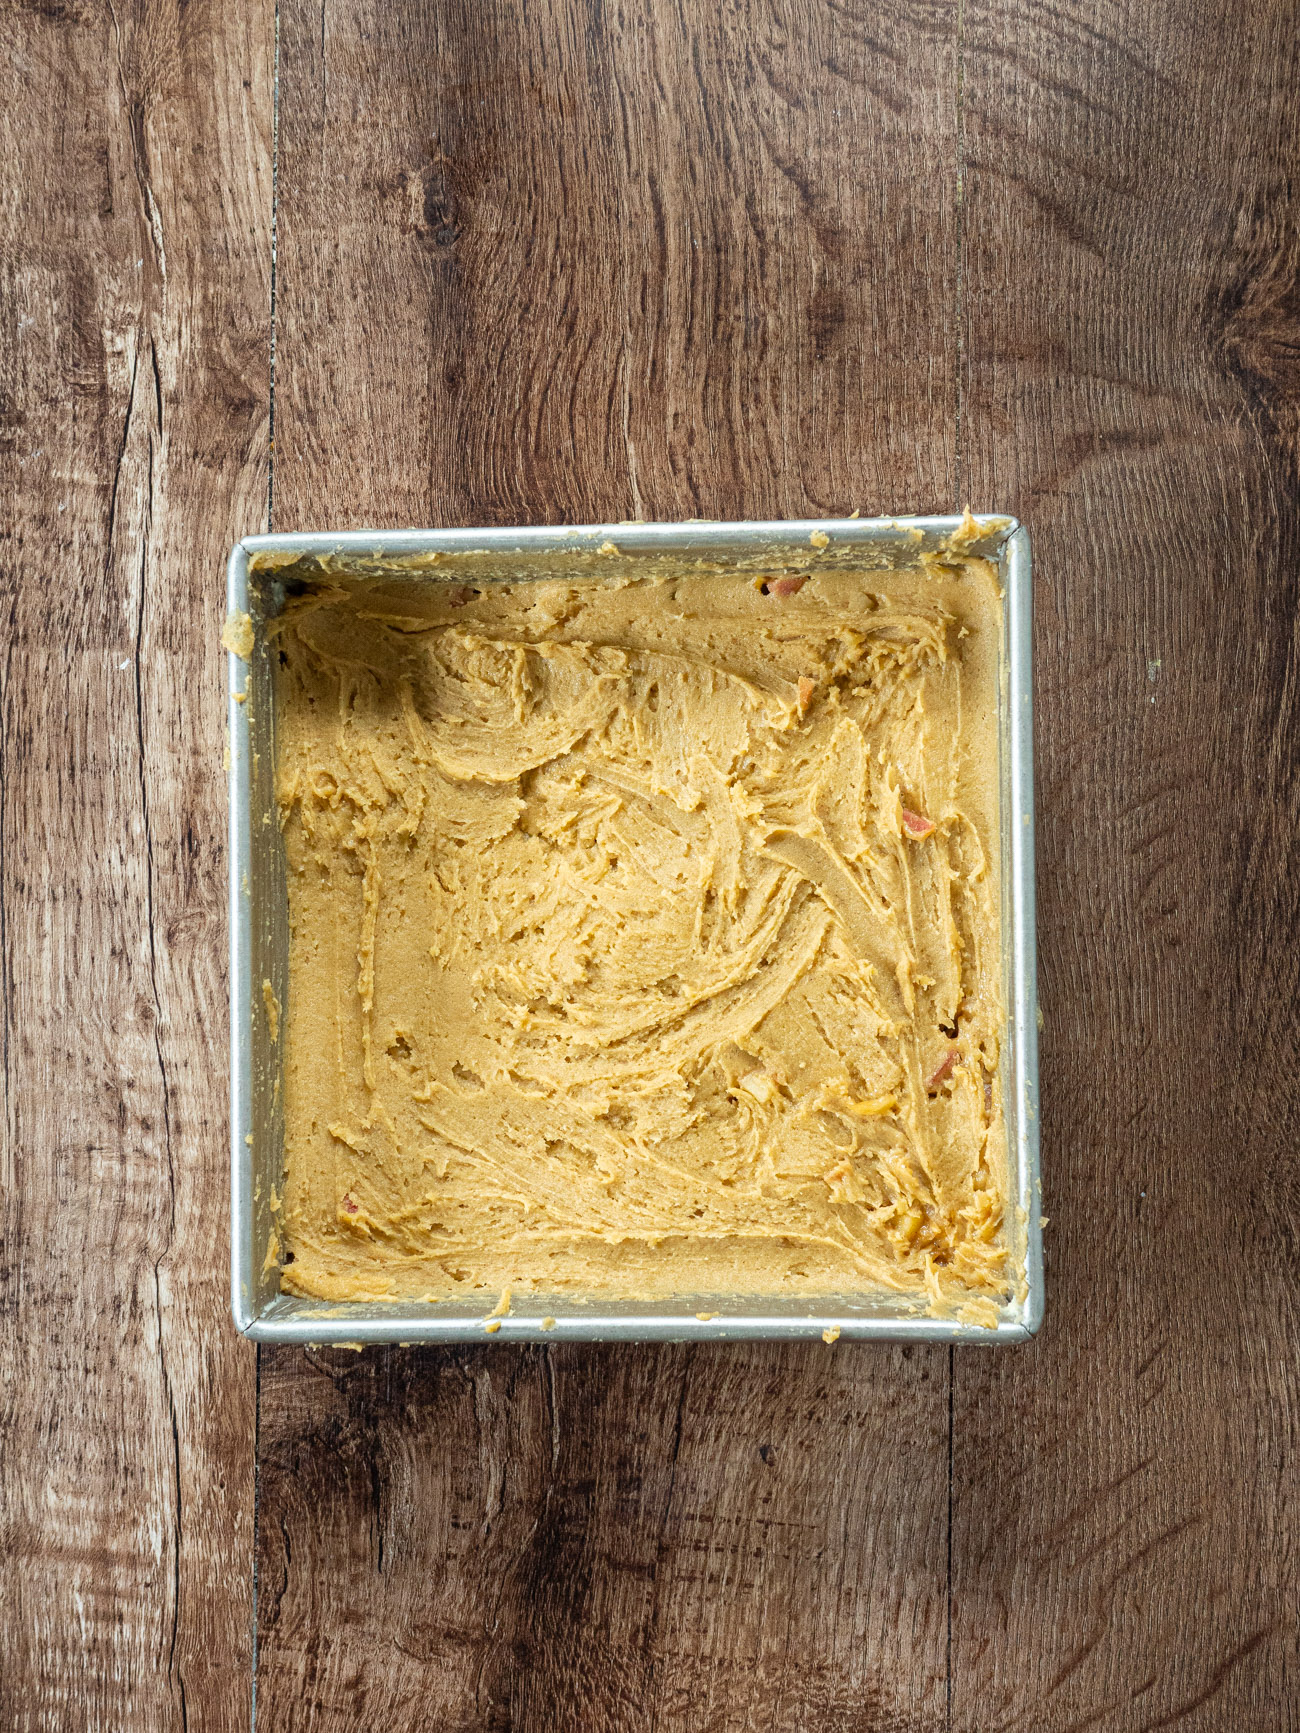 In the bottom of the prepared pan, spread half the blondie batter evenly, using a spatula (the mixture will be thick, you may find it easier to use your hands).